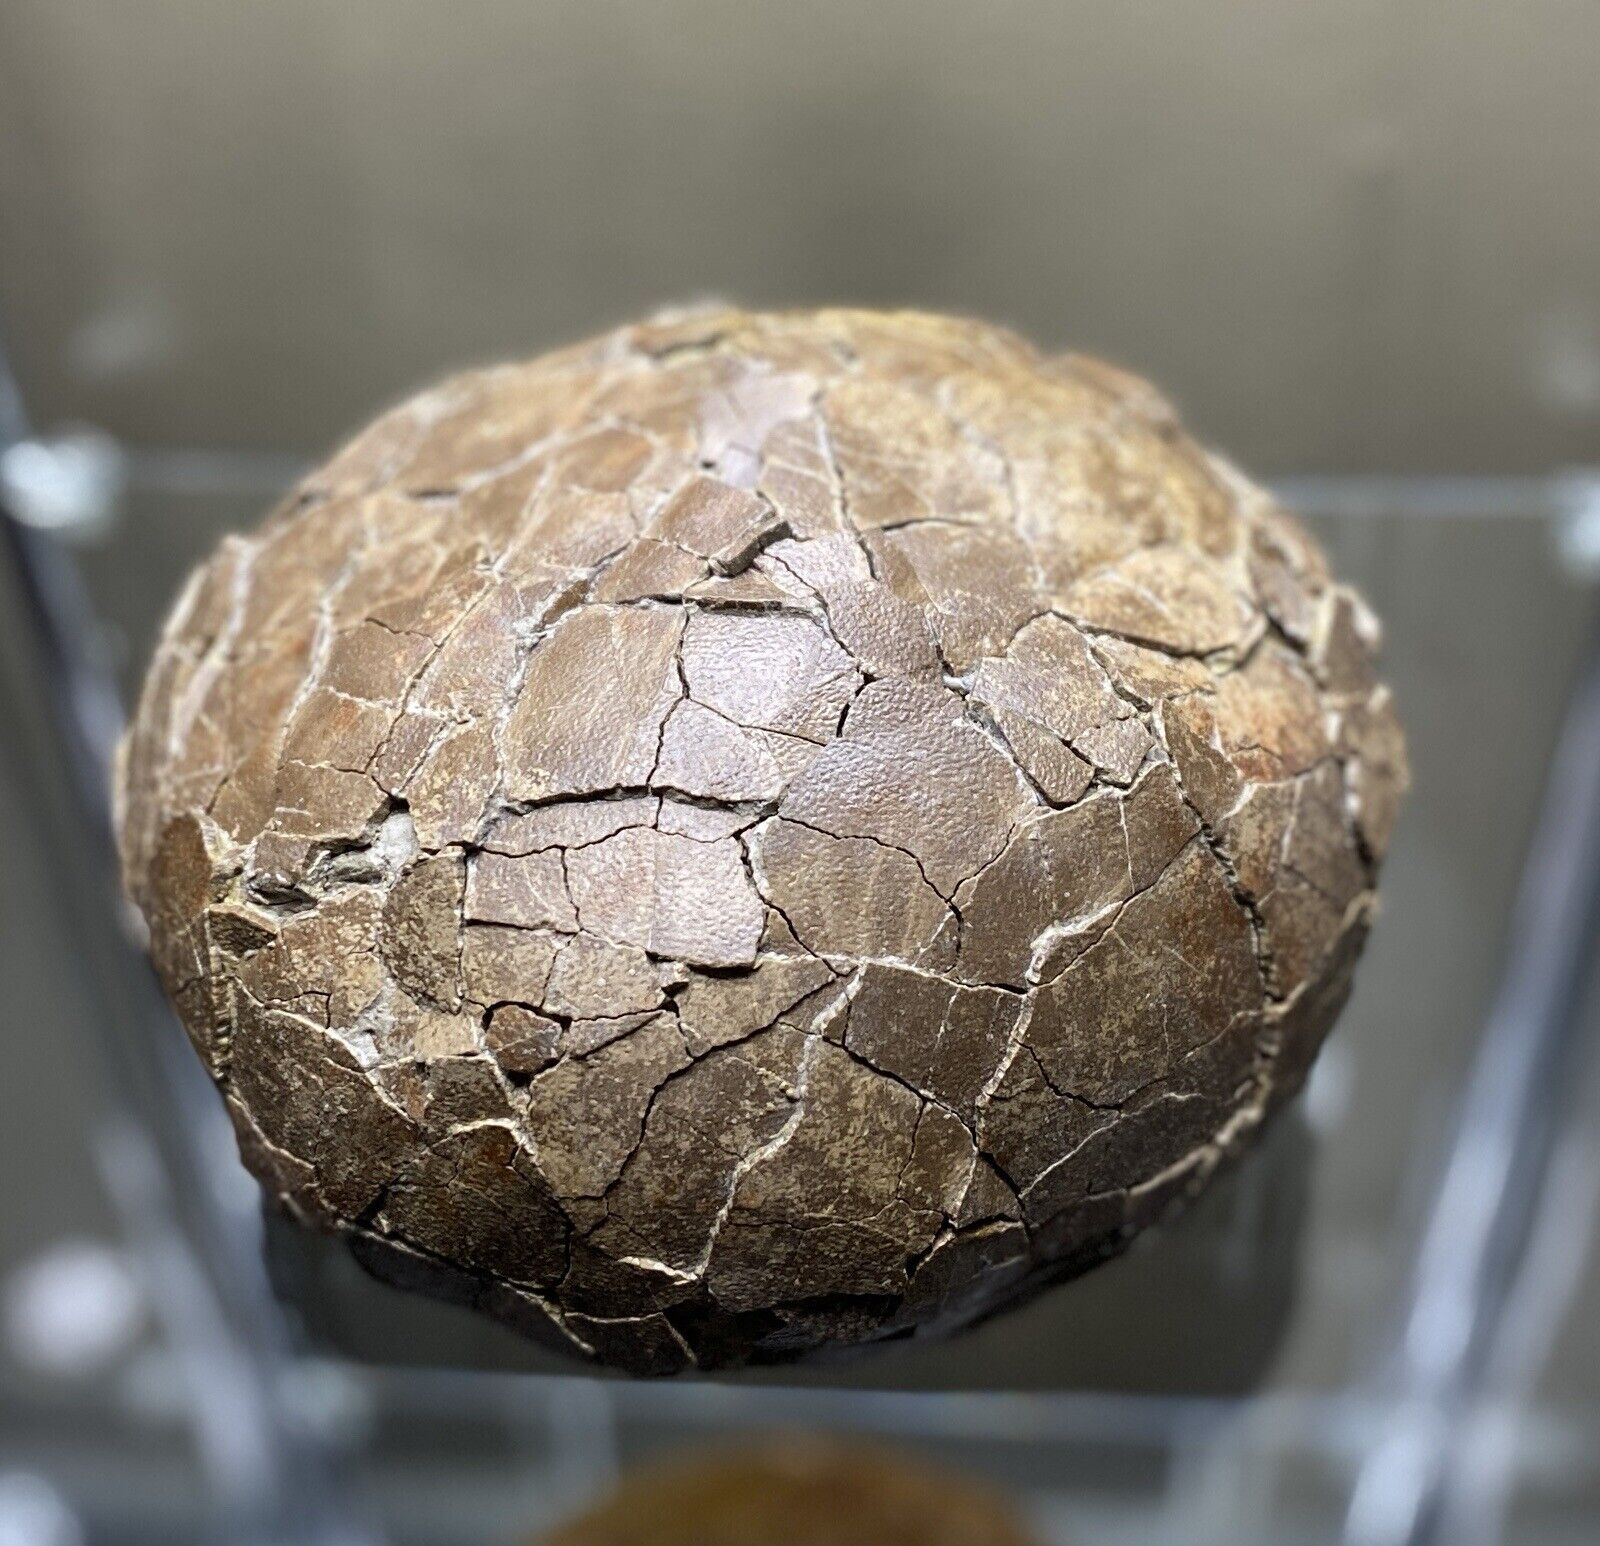 MASSIVE French Sauropod Dinosaur Fossil Egg THE WORLDS MOST BEAUTIFUL DINO EGG